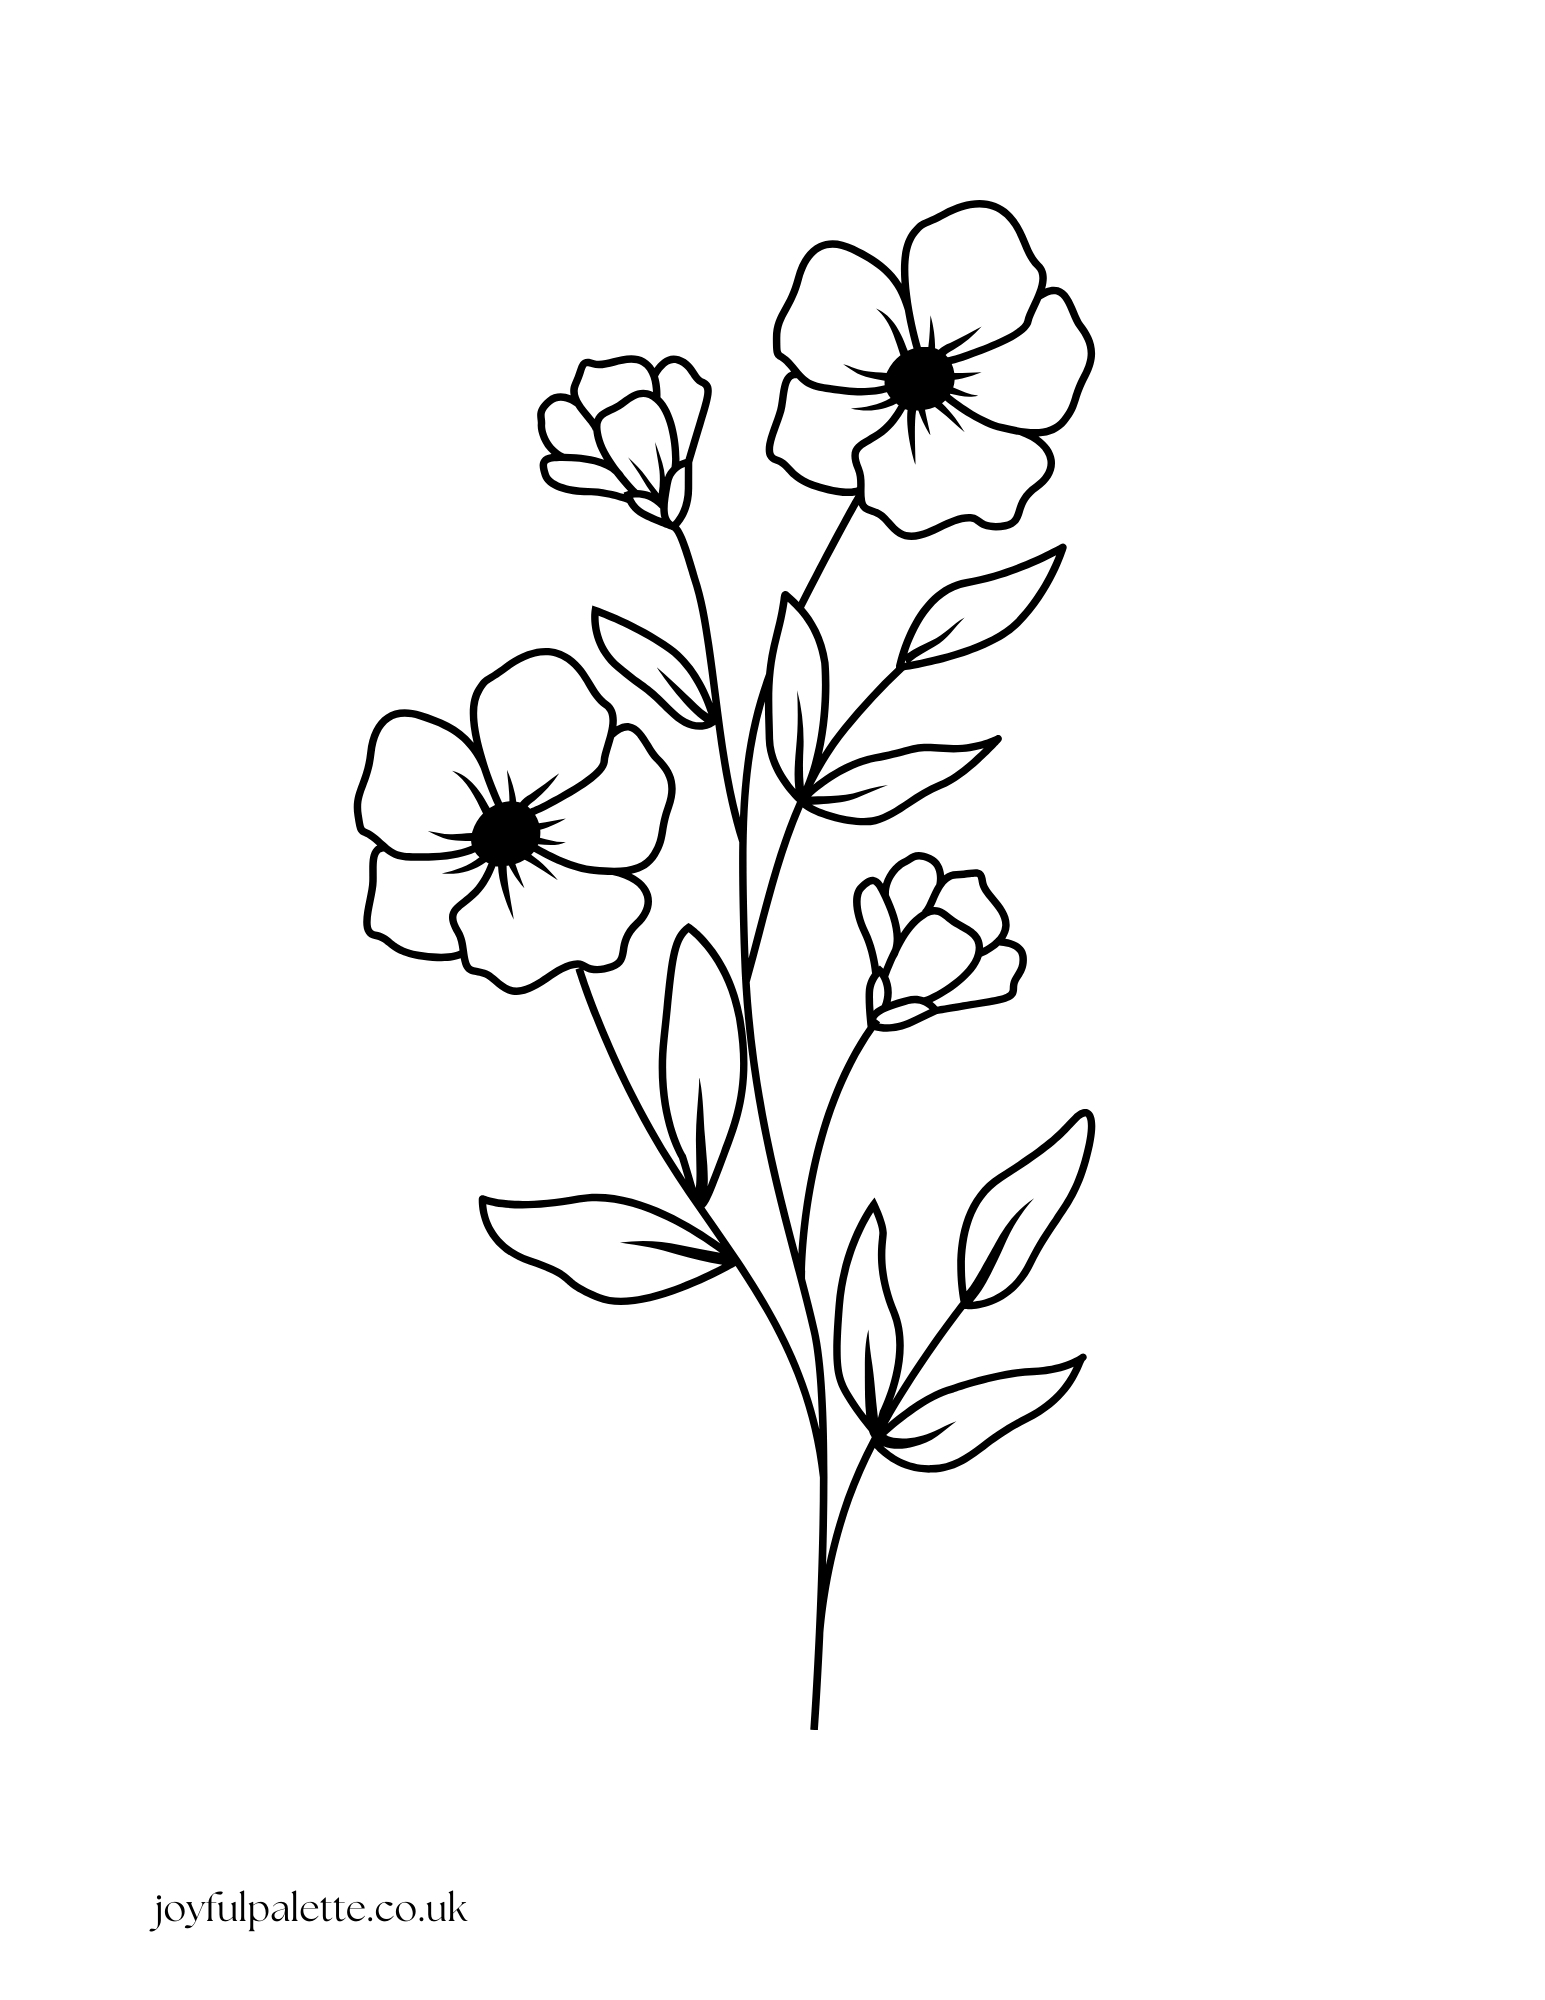 Flower Coloring Page for Kids